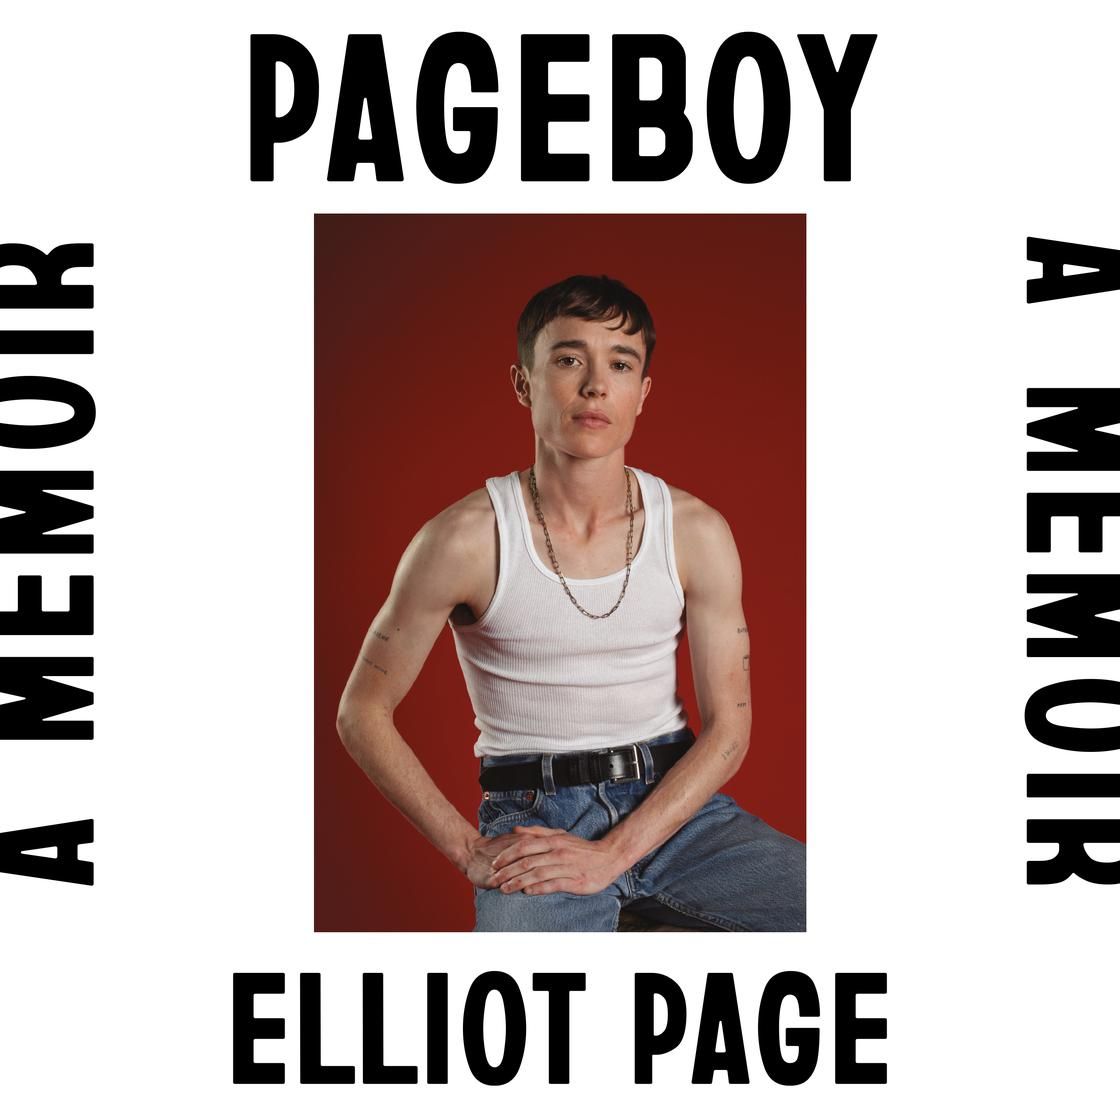 audiobook of Pageboy By Elliot Page, narrated by the author